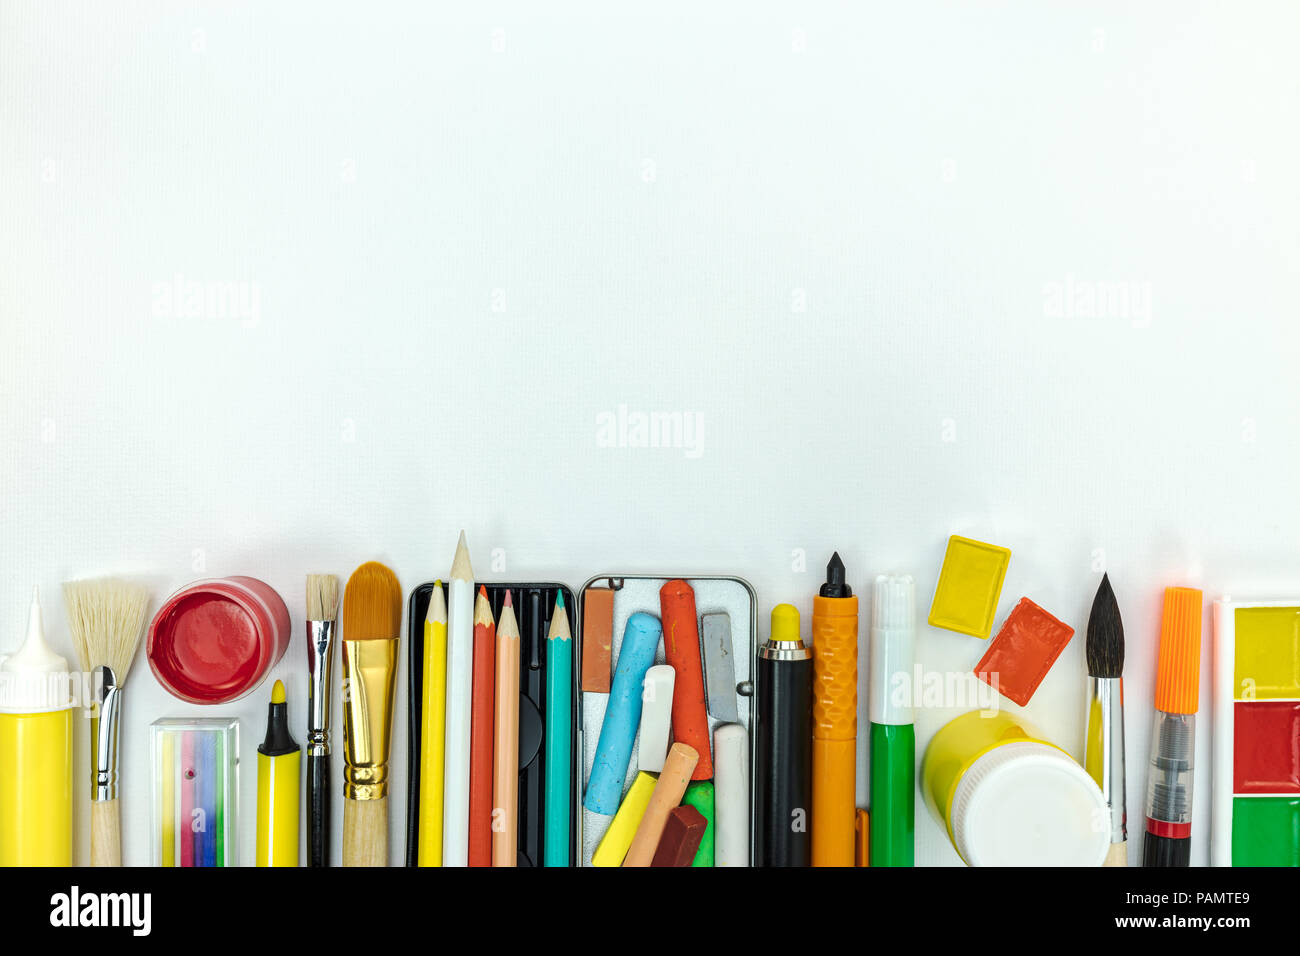 various school supplies and tools for painting. watercolor paints, pencils, crayon, brushes on white desk Stock Photo